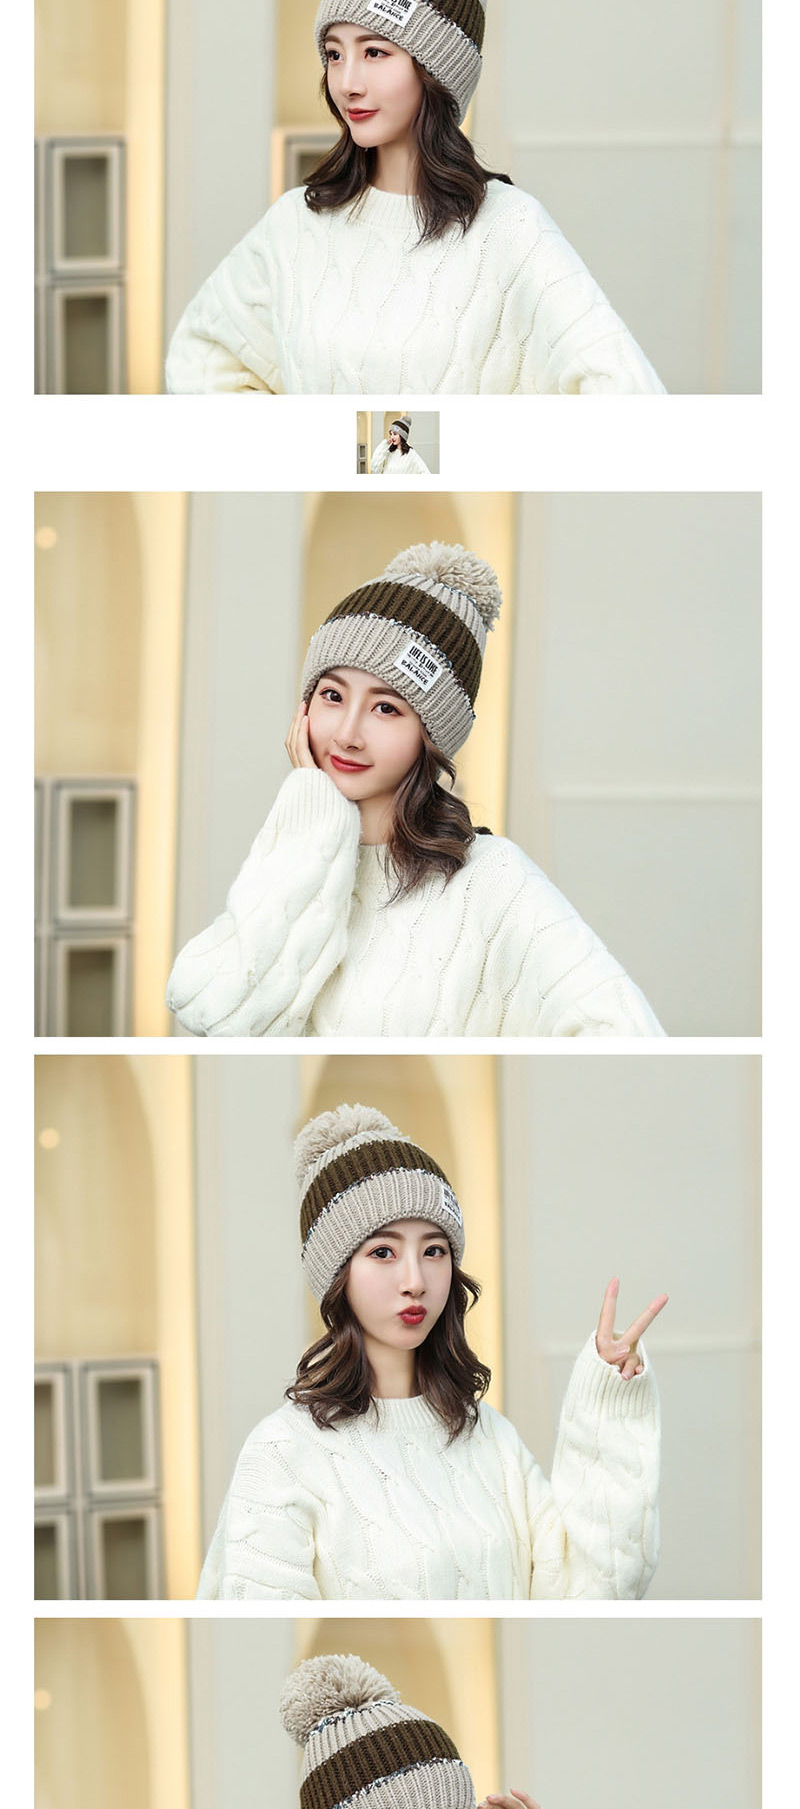 Fashion Red Wine Color Matching Knitted Wool Cap,Knitting Wool Hats